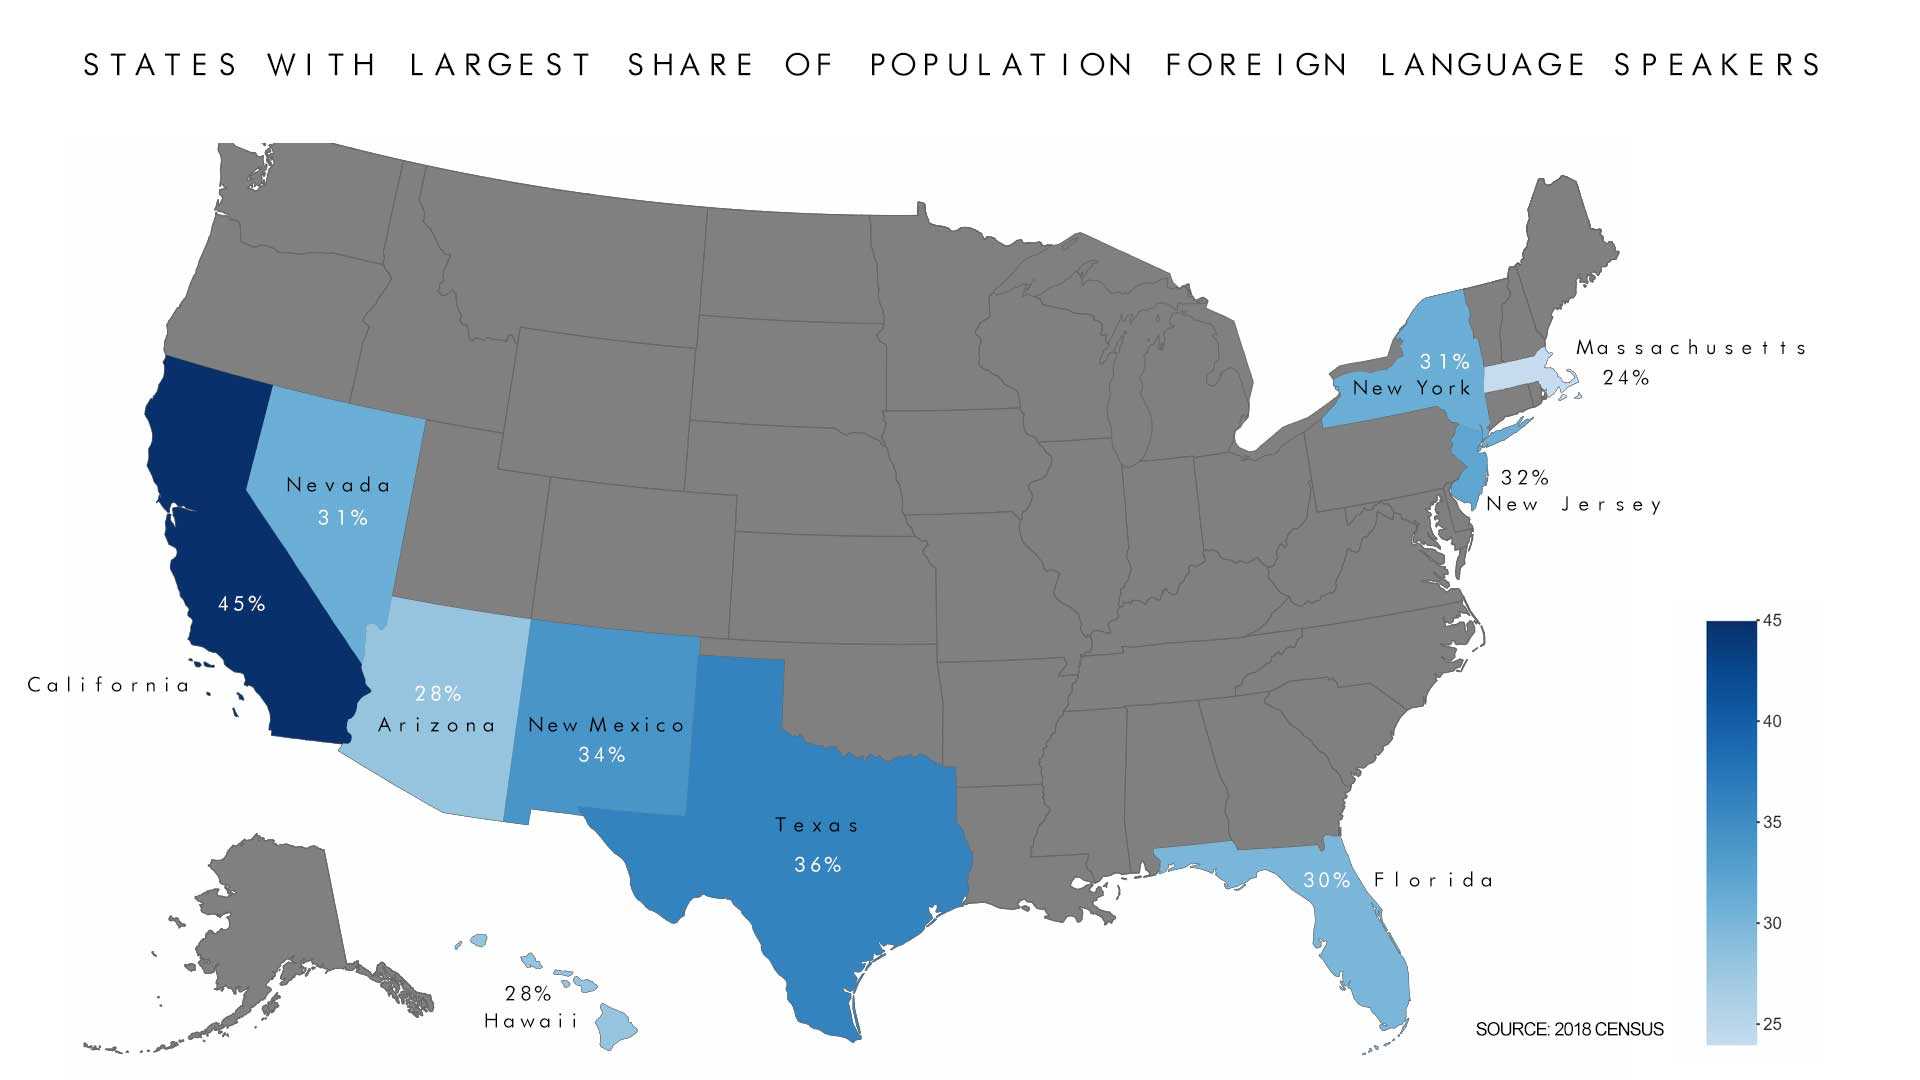 U.S. States with Largest Share of Population Speaking Foreign Language according to 2018 U.S. Census